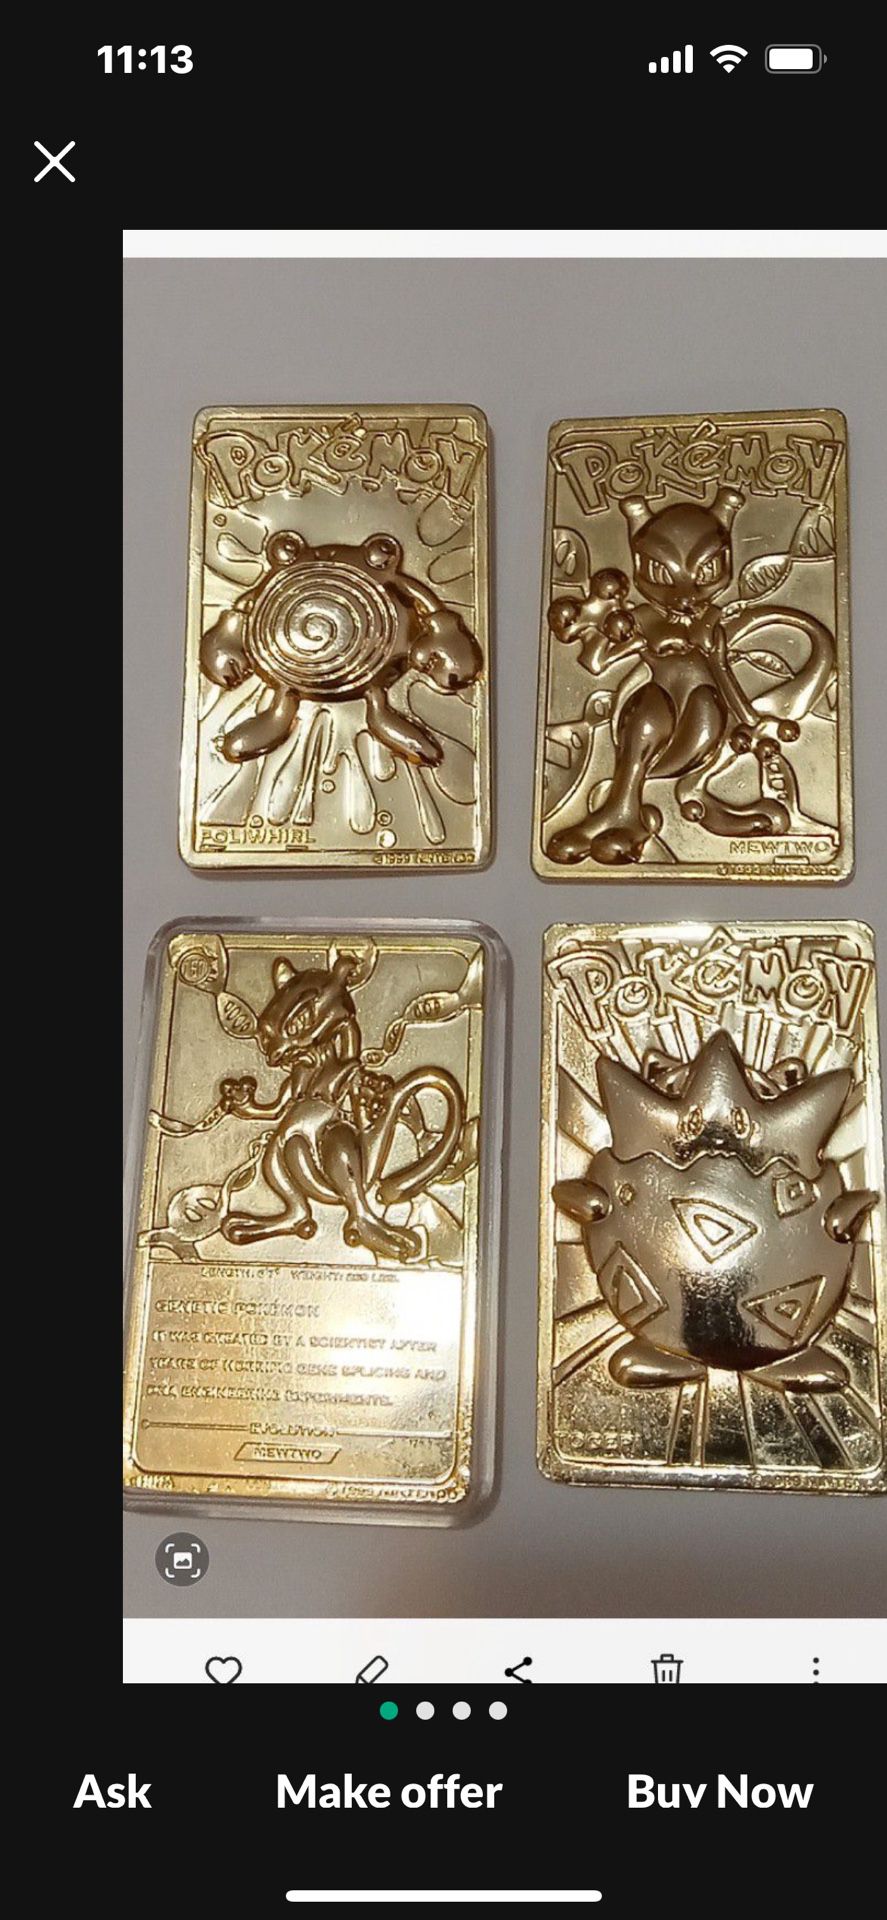 Gold Plated Pokemon Cards 4 Of Them. Sale Or Maybe Trade 